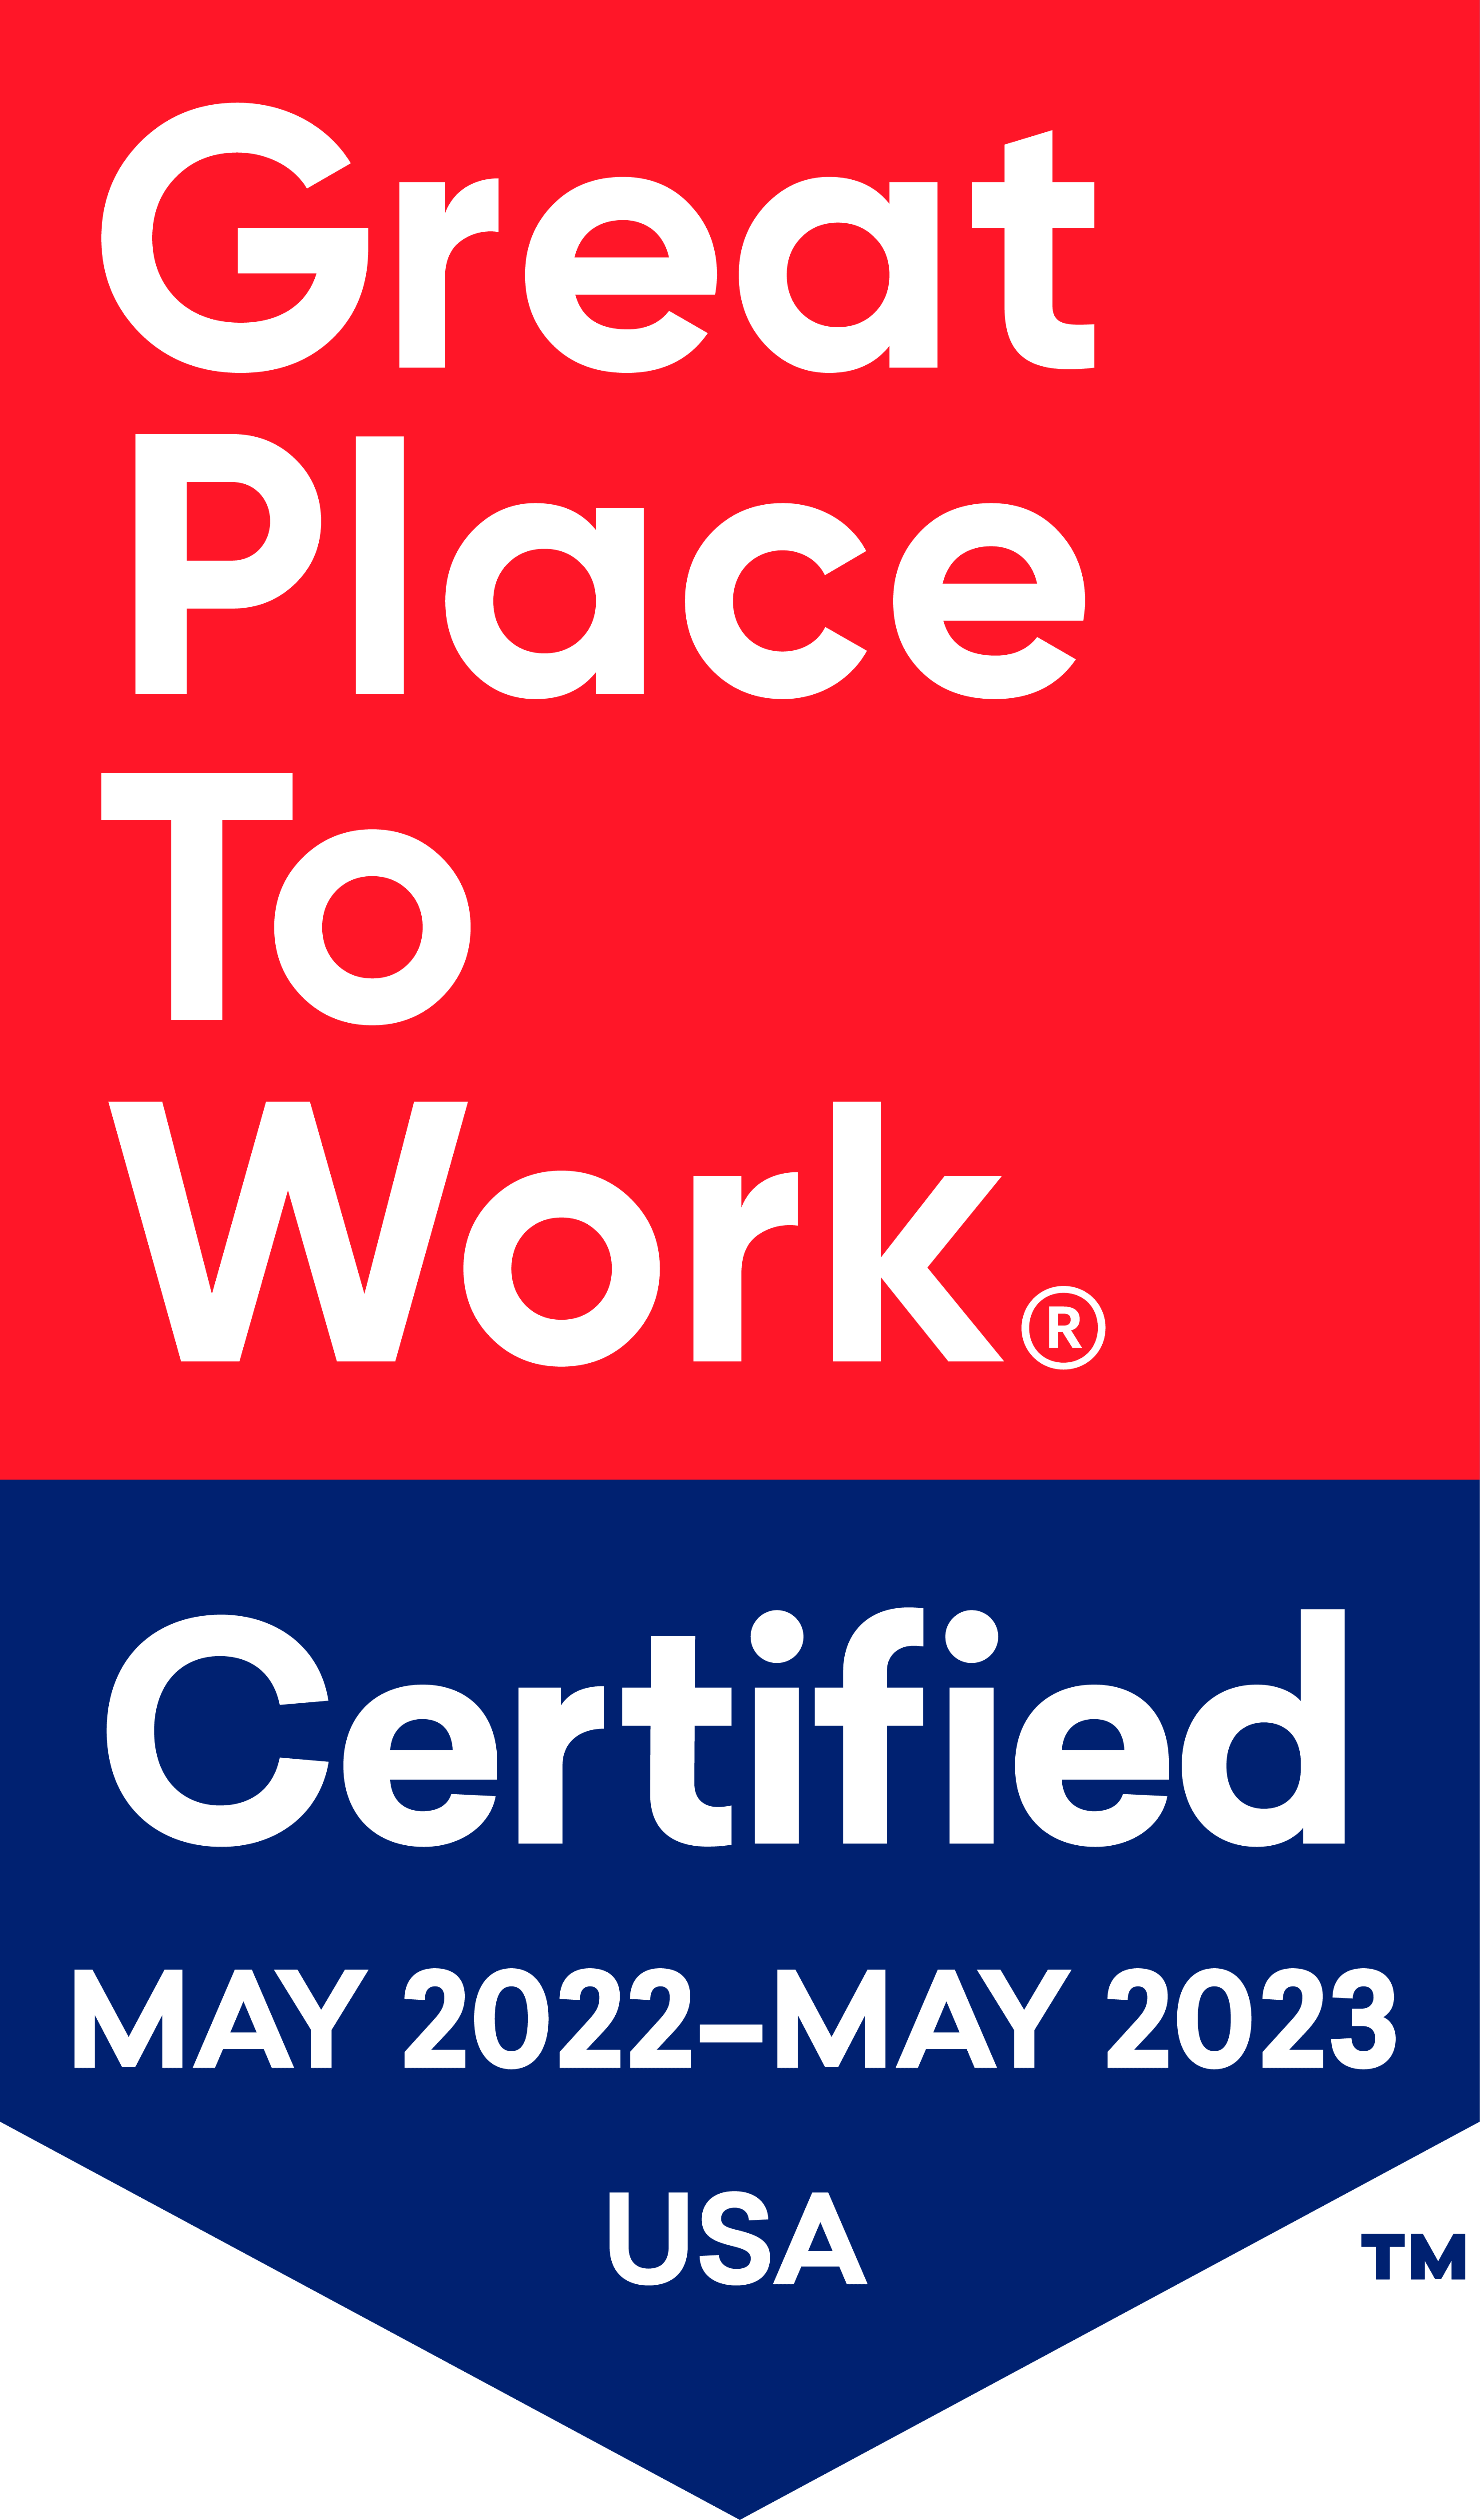 Dale Commons is Great Place To Work Certified